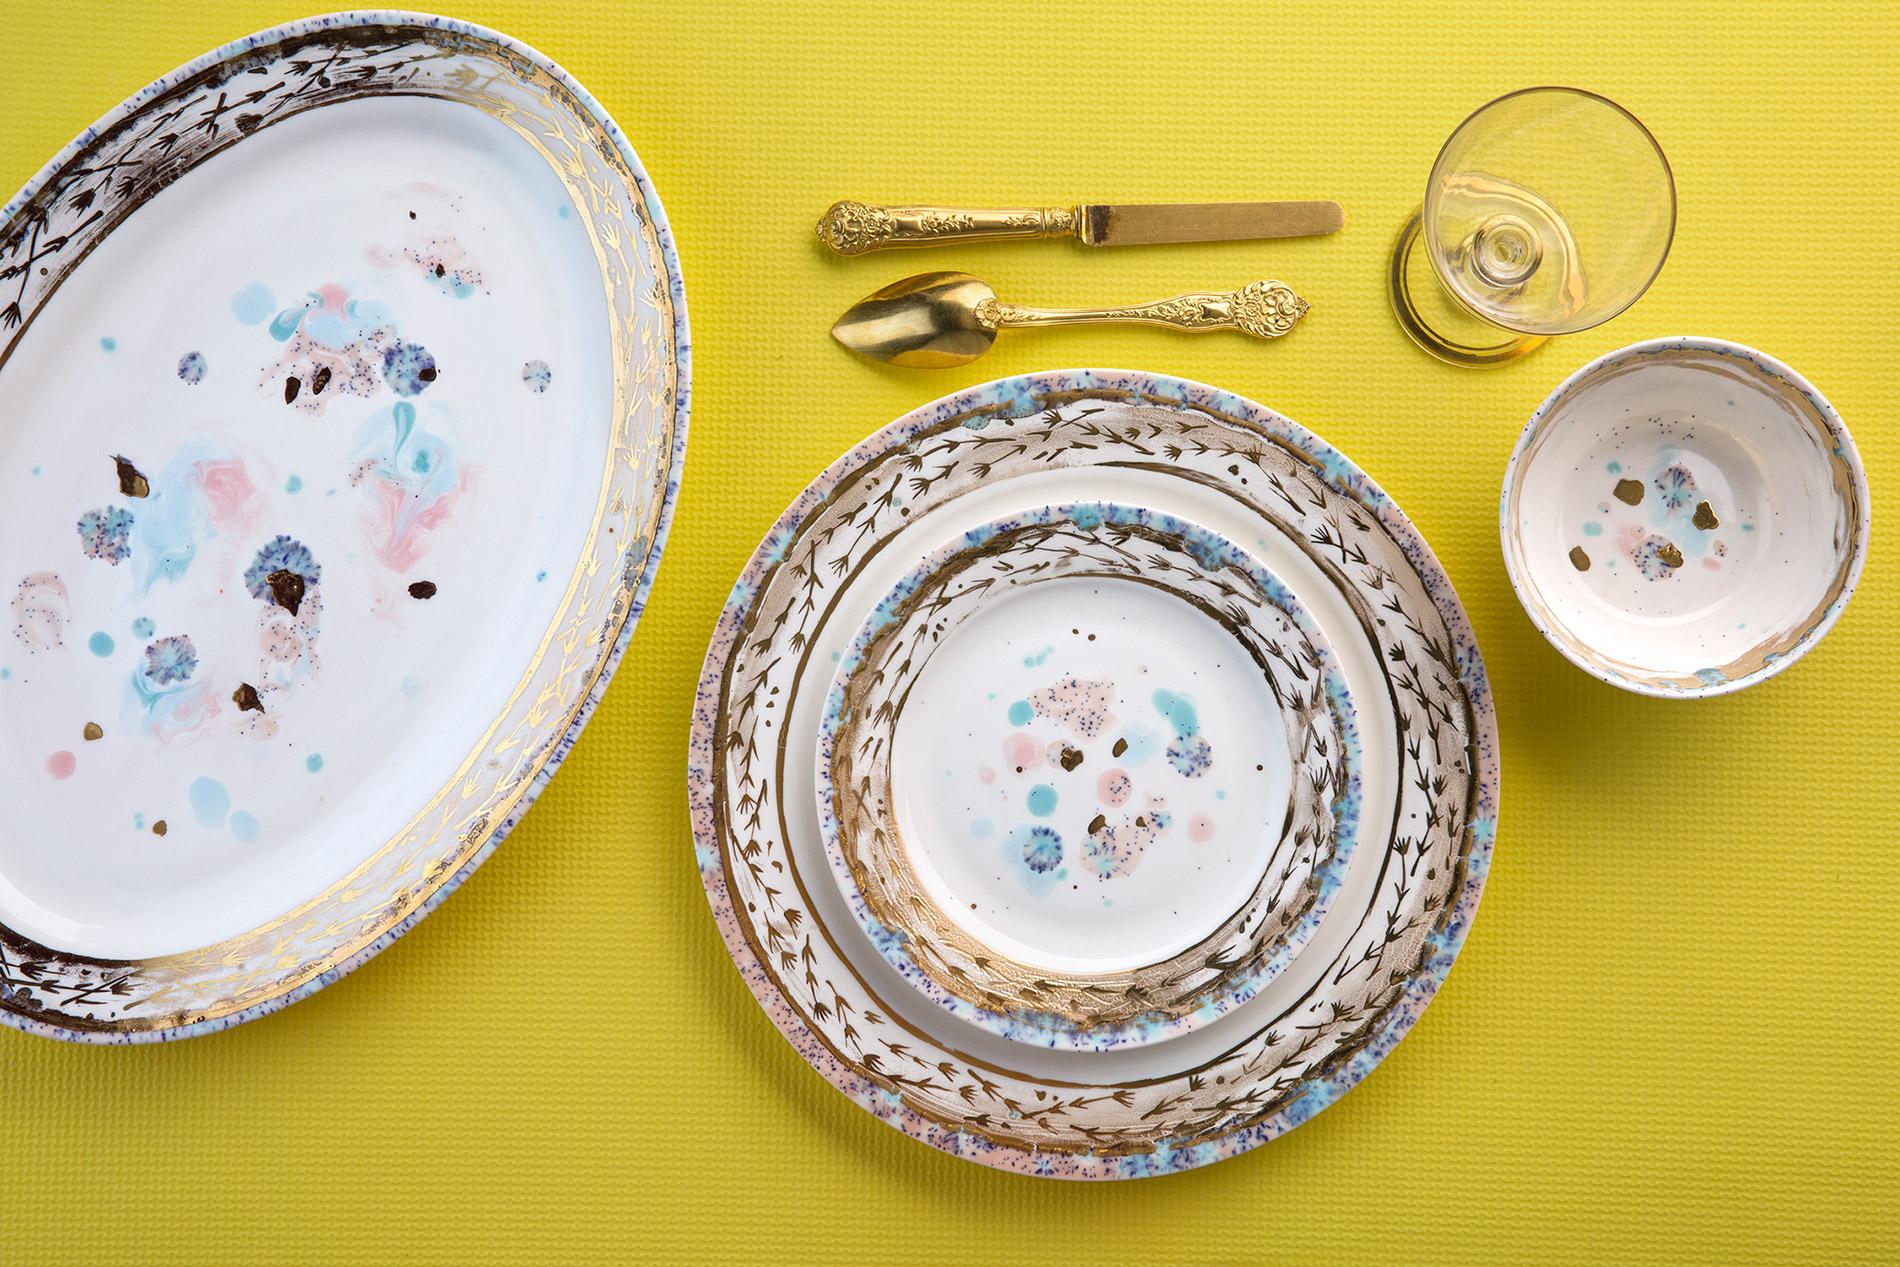 Hand painted in Italy from the finest porcelain, this Dafne Rim Platter has a narrow pink and blue dotted rim surrounding a broad, delicate golden decor of stylized flowers; subtle light blue and pink brushes sprinkled with black powder float on the